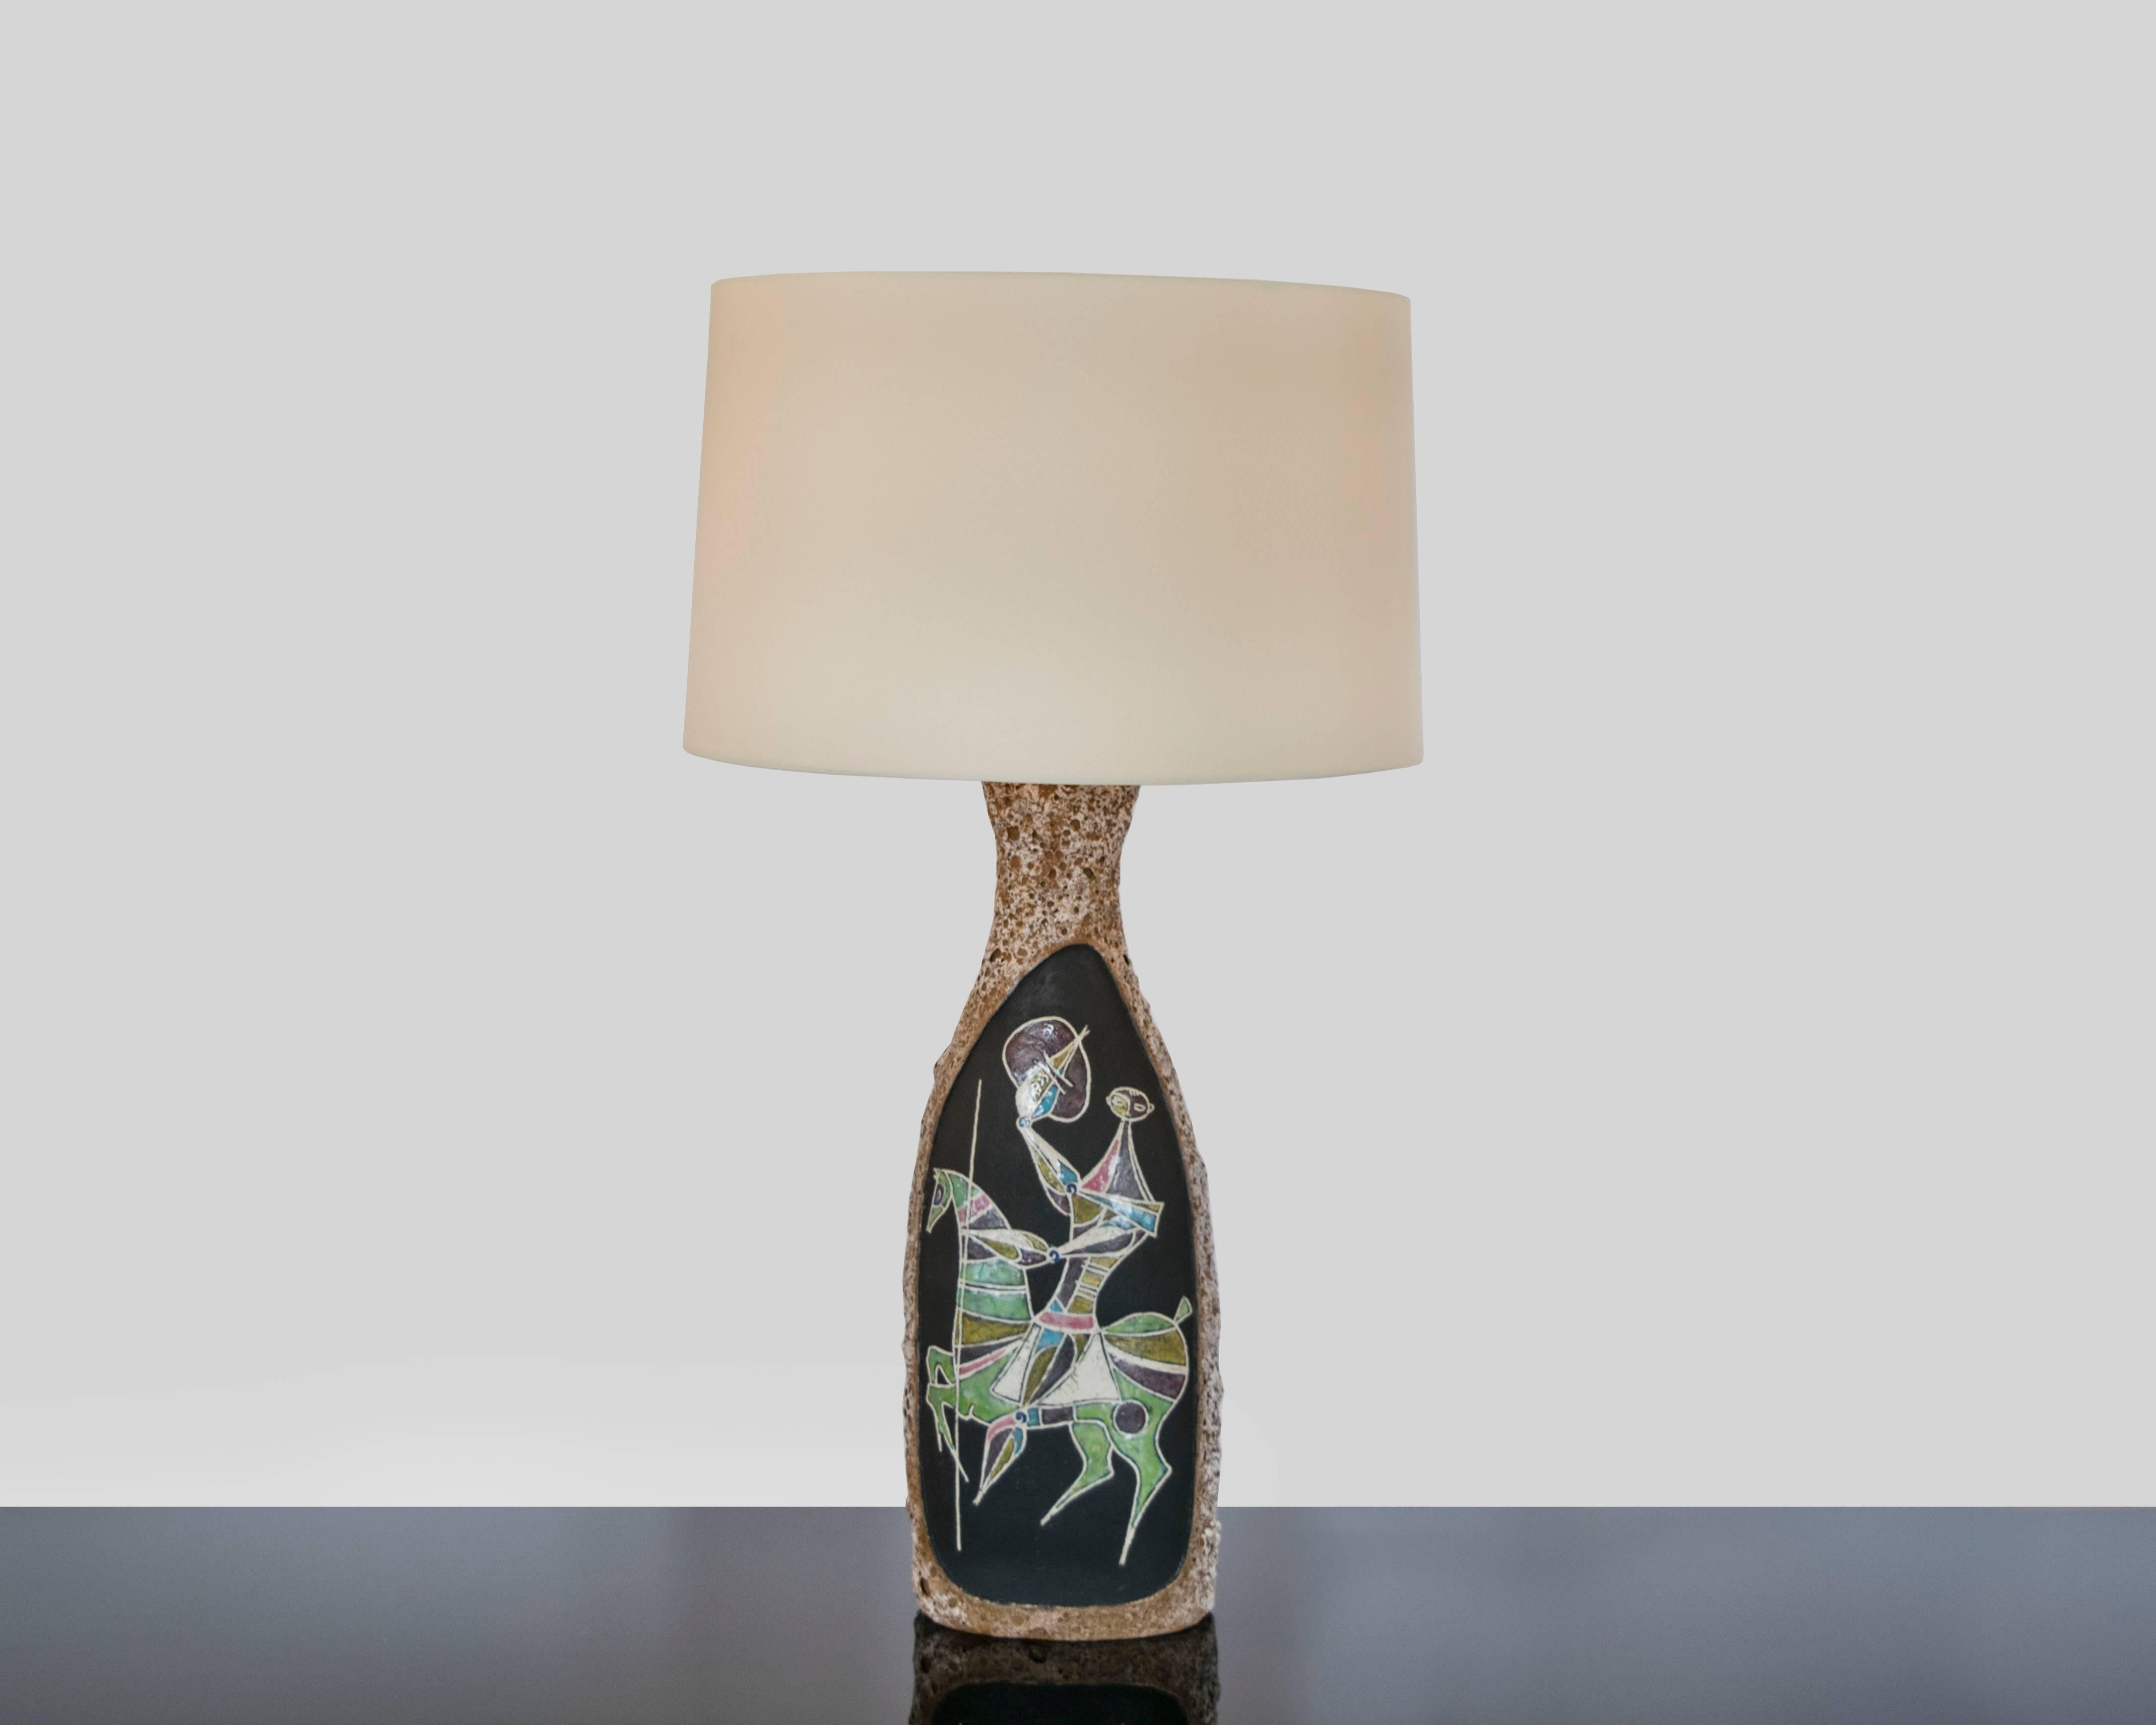 Hand-painted and very rare signed Fantoni, Italy lamp from the 1950s.